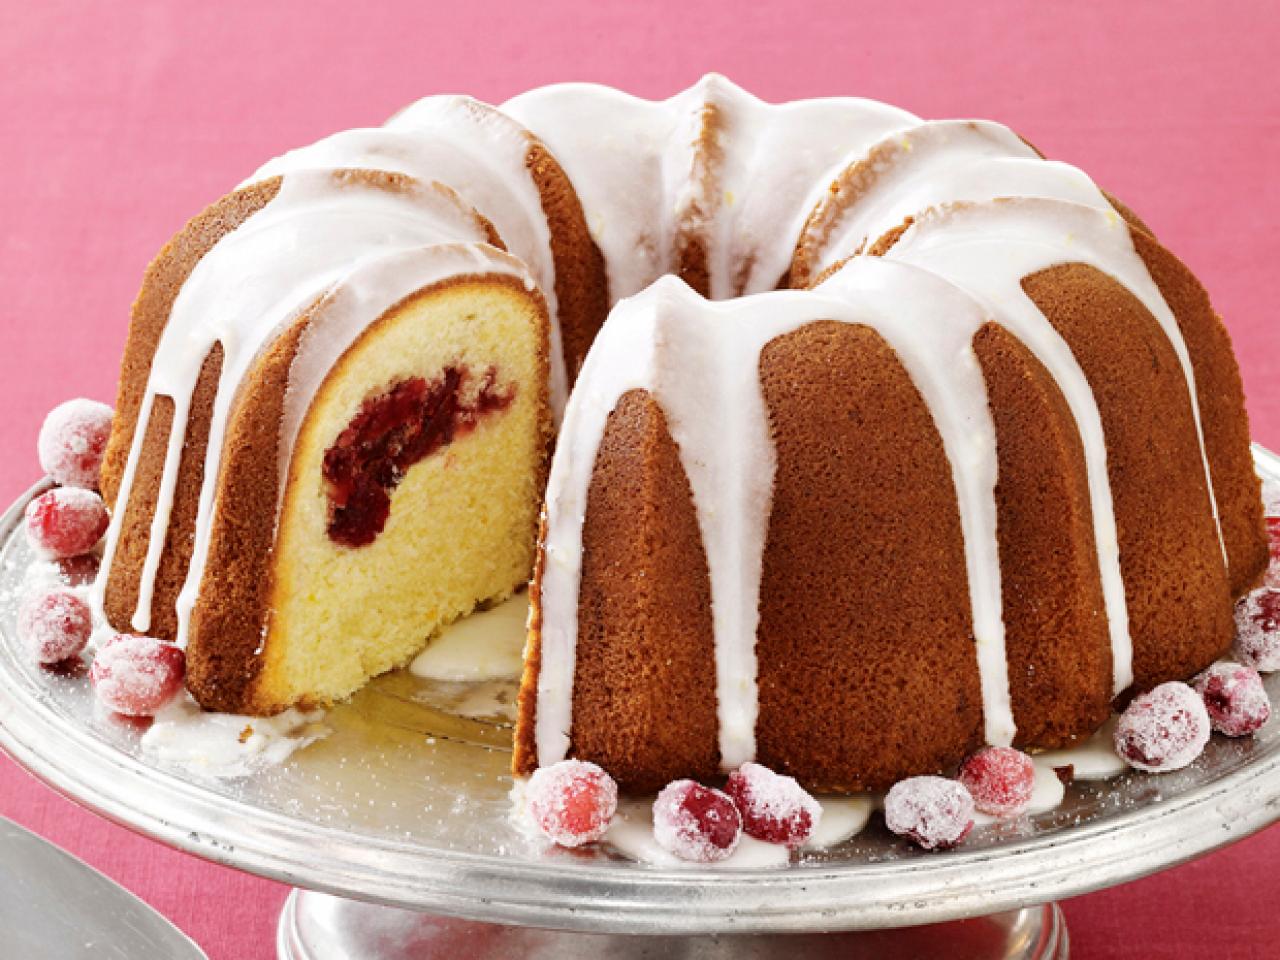 Pumpkin-Cranberry Bundt Cake with Cream Cheese Filling